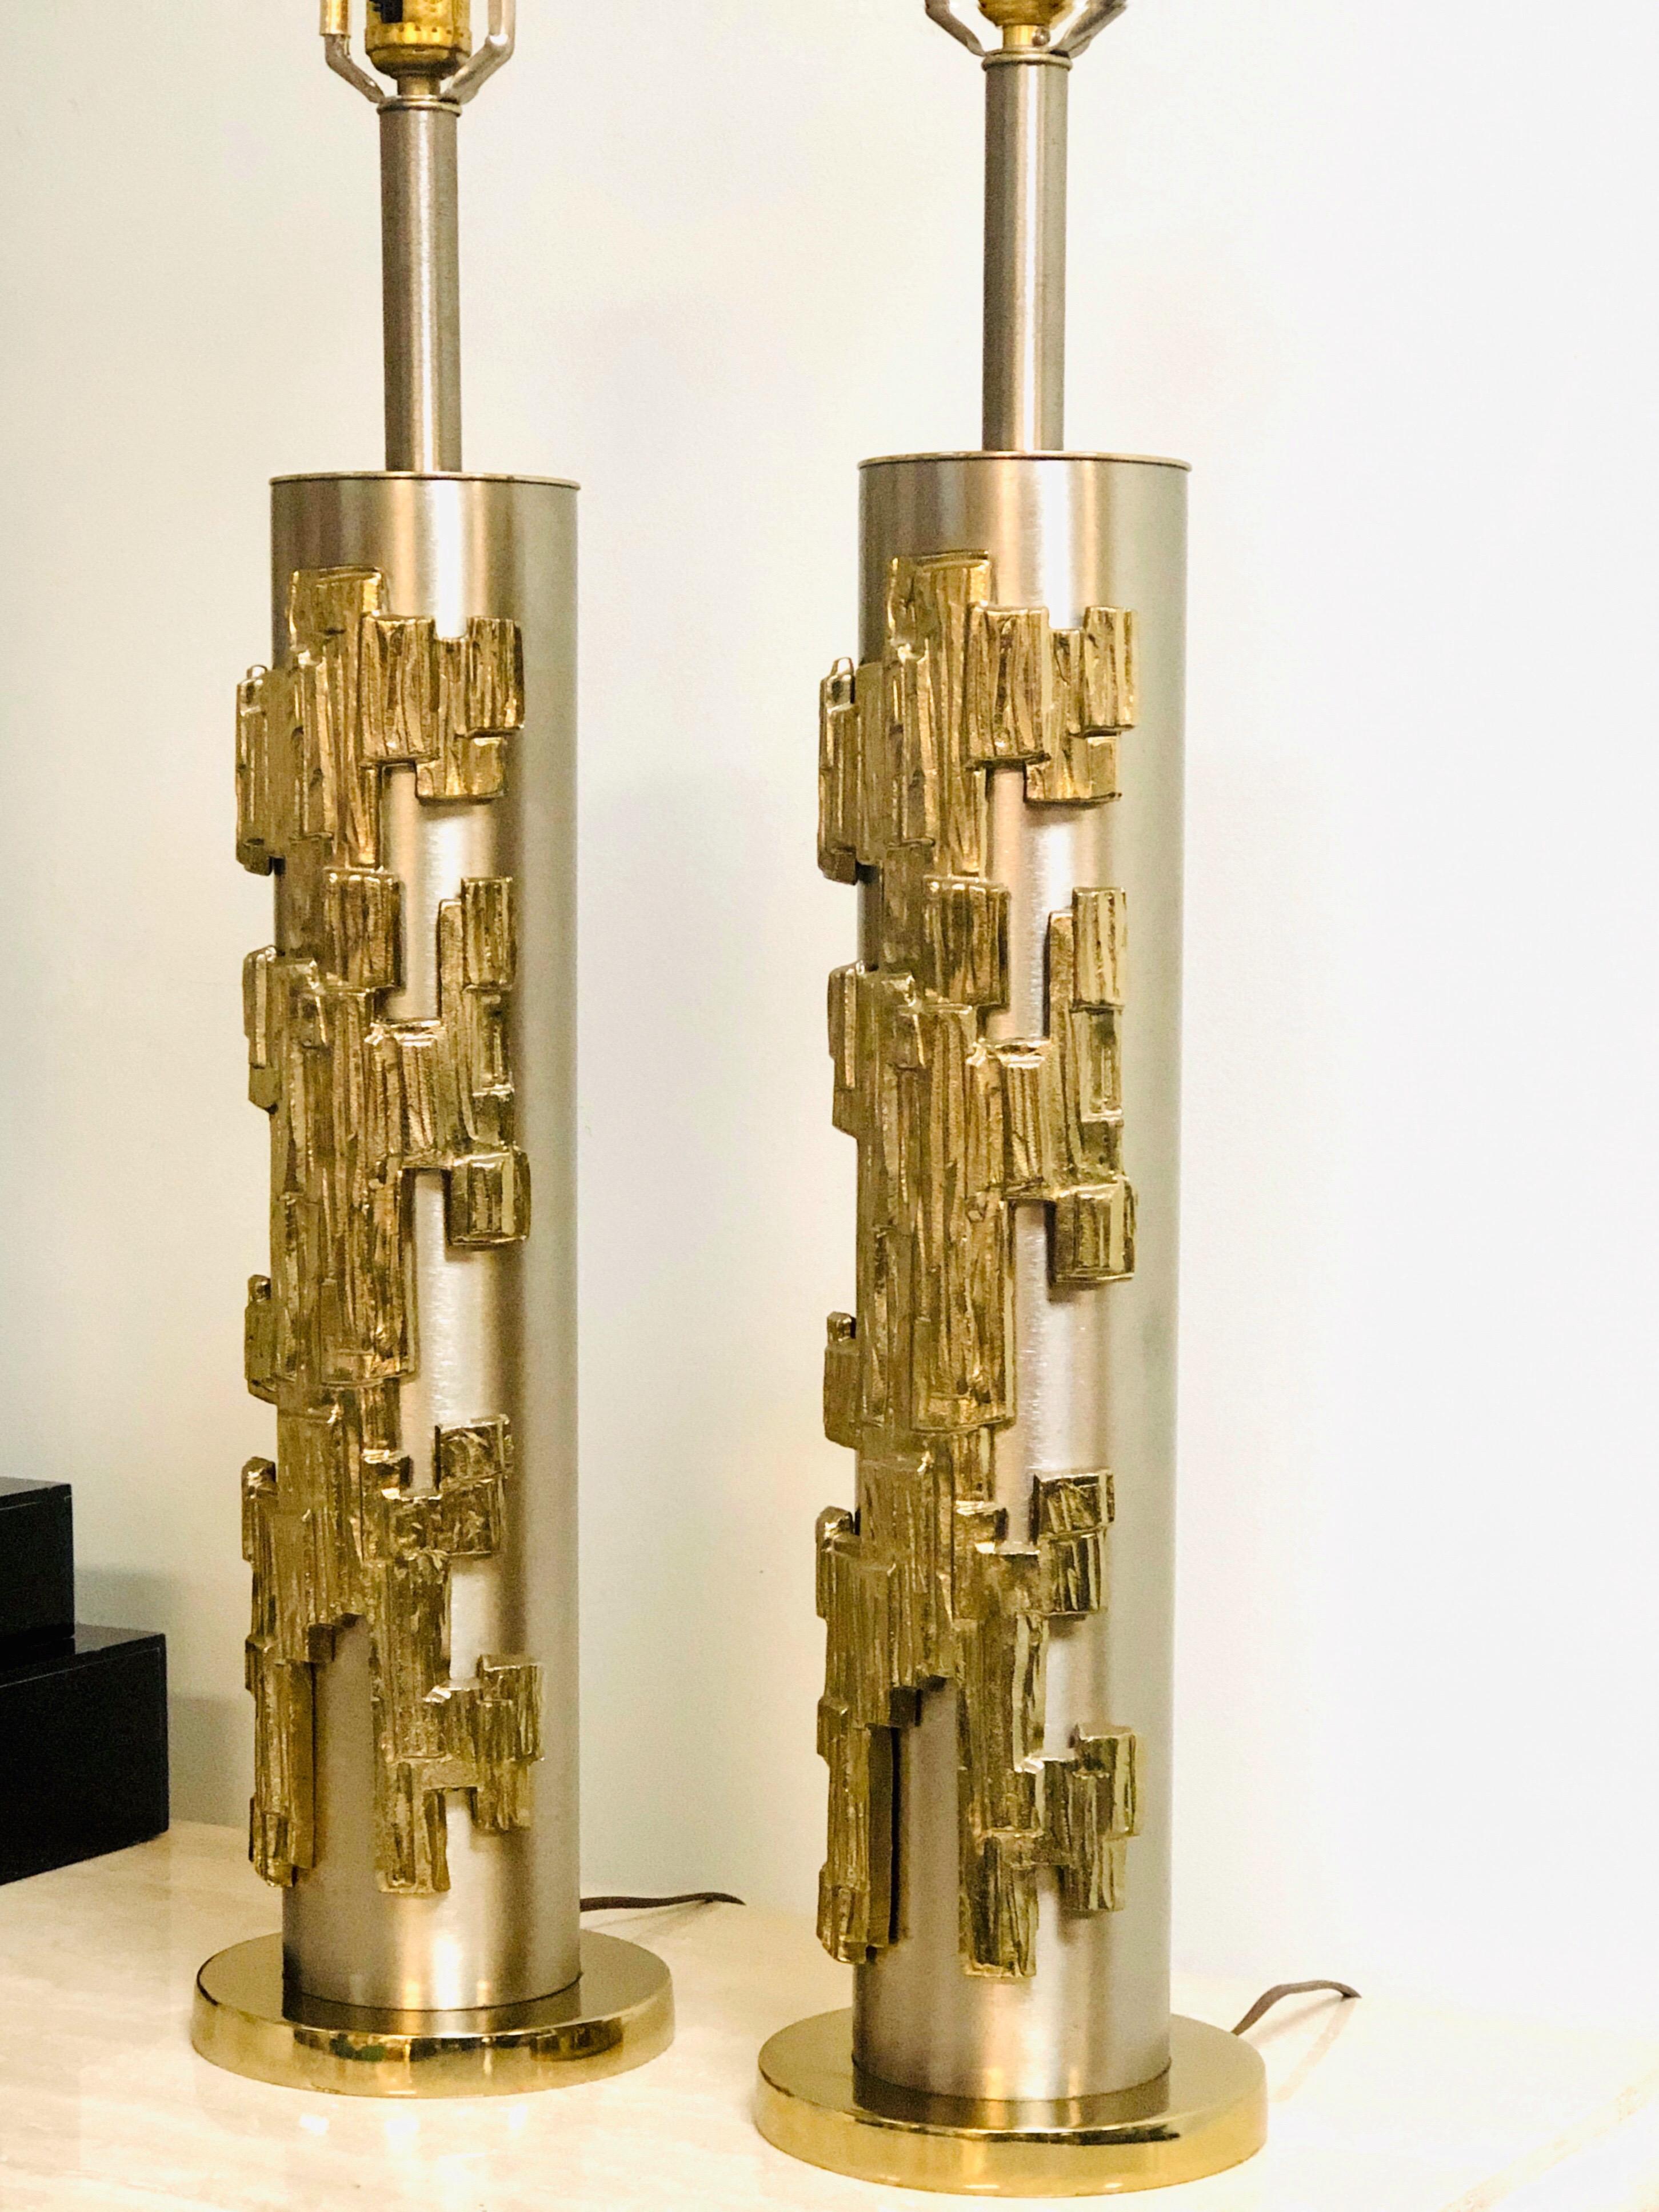 American Pair of Sculptural Table Lamps Brushed Nickel and Brass by Laurel